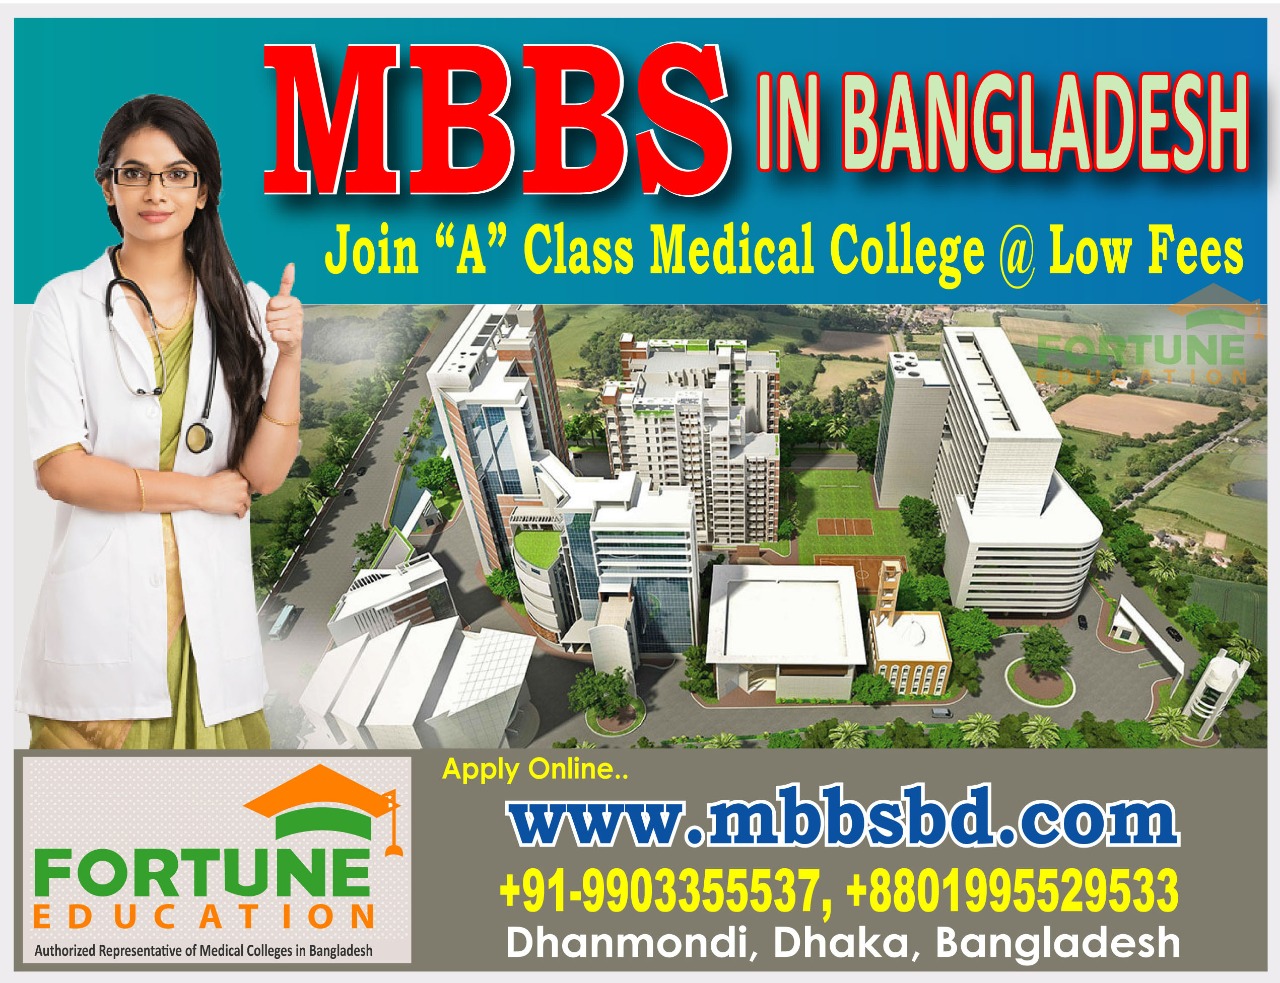 MBBS ADMISSION PROCESS IN BANGLADESH